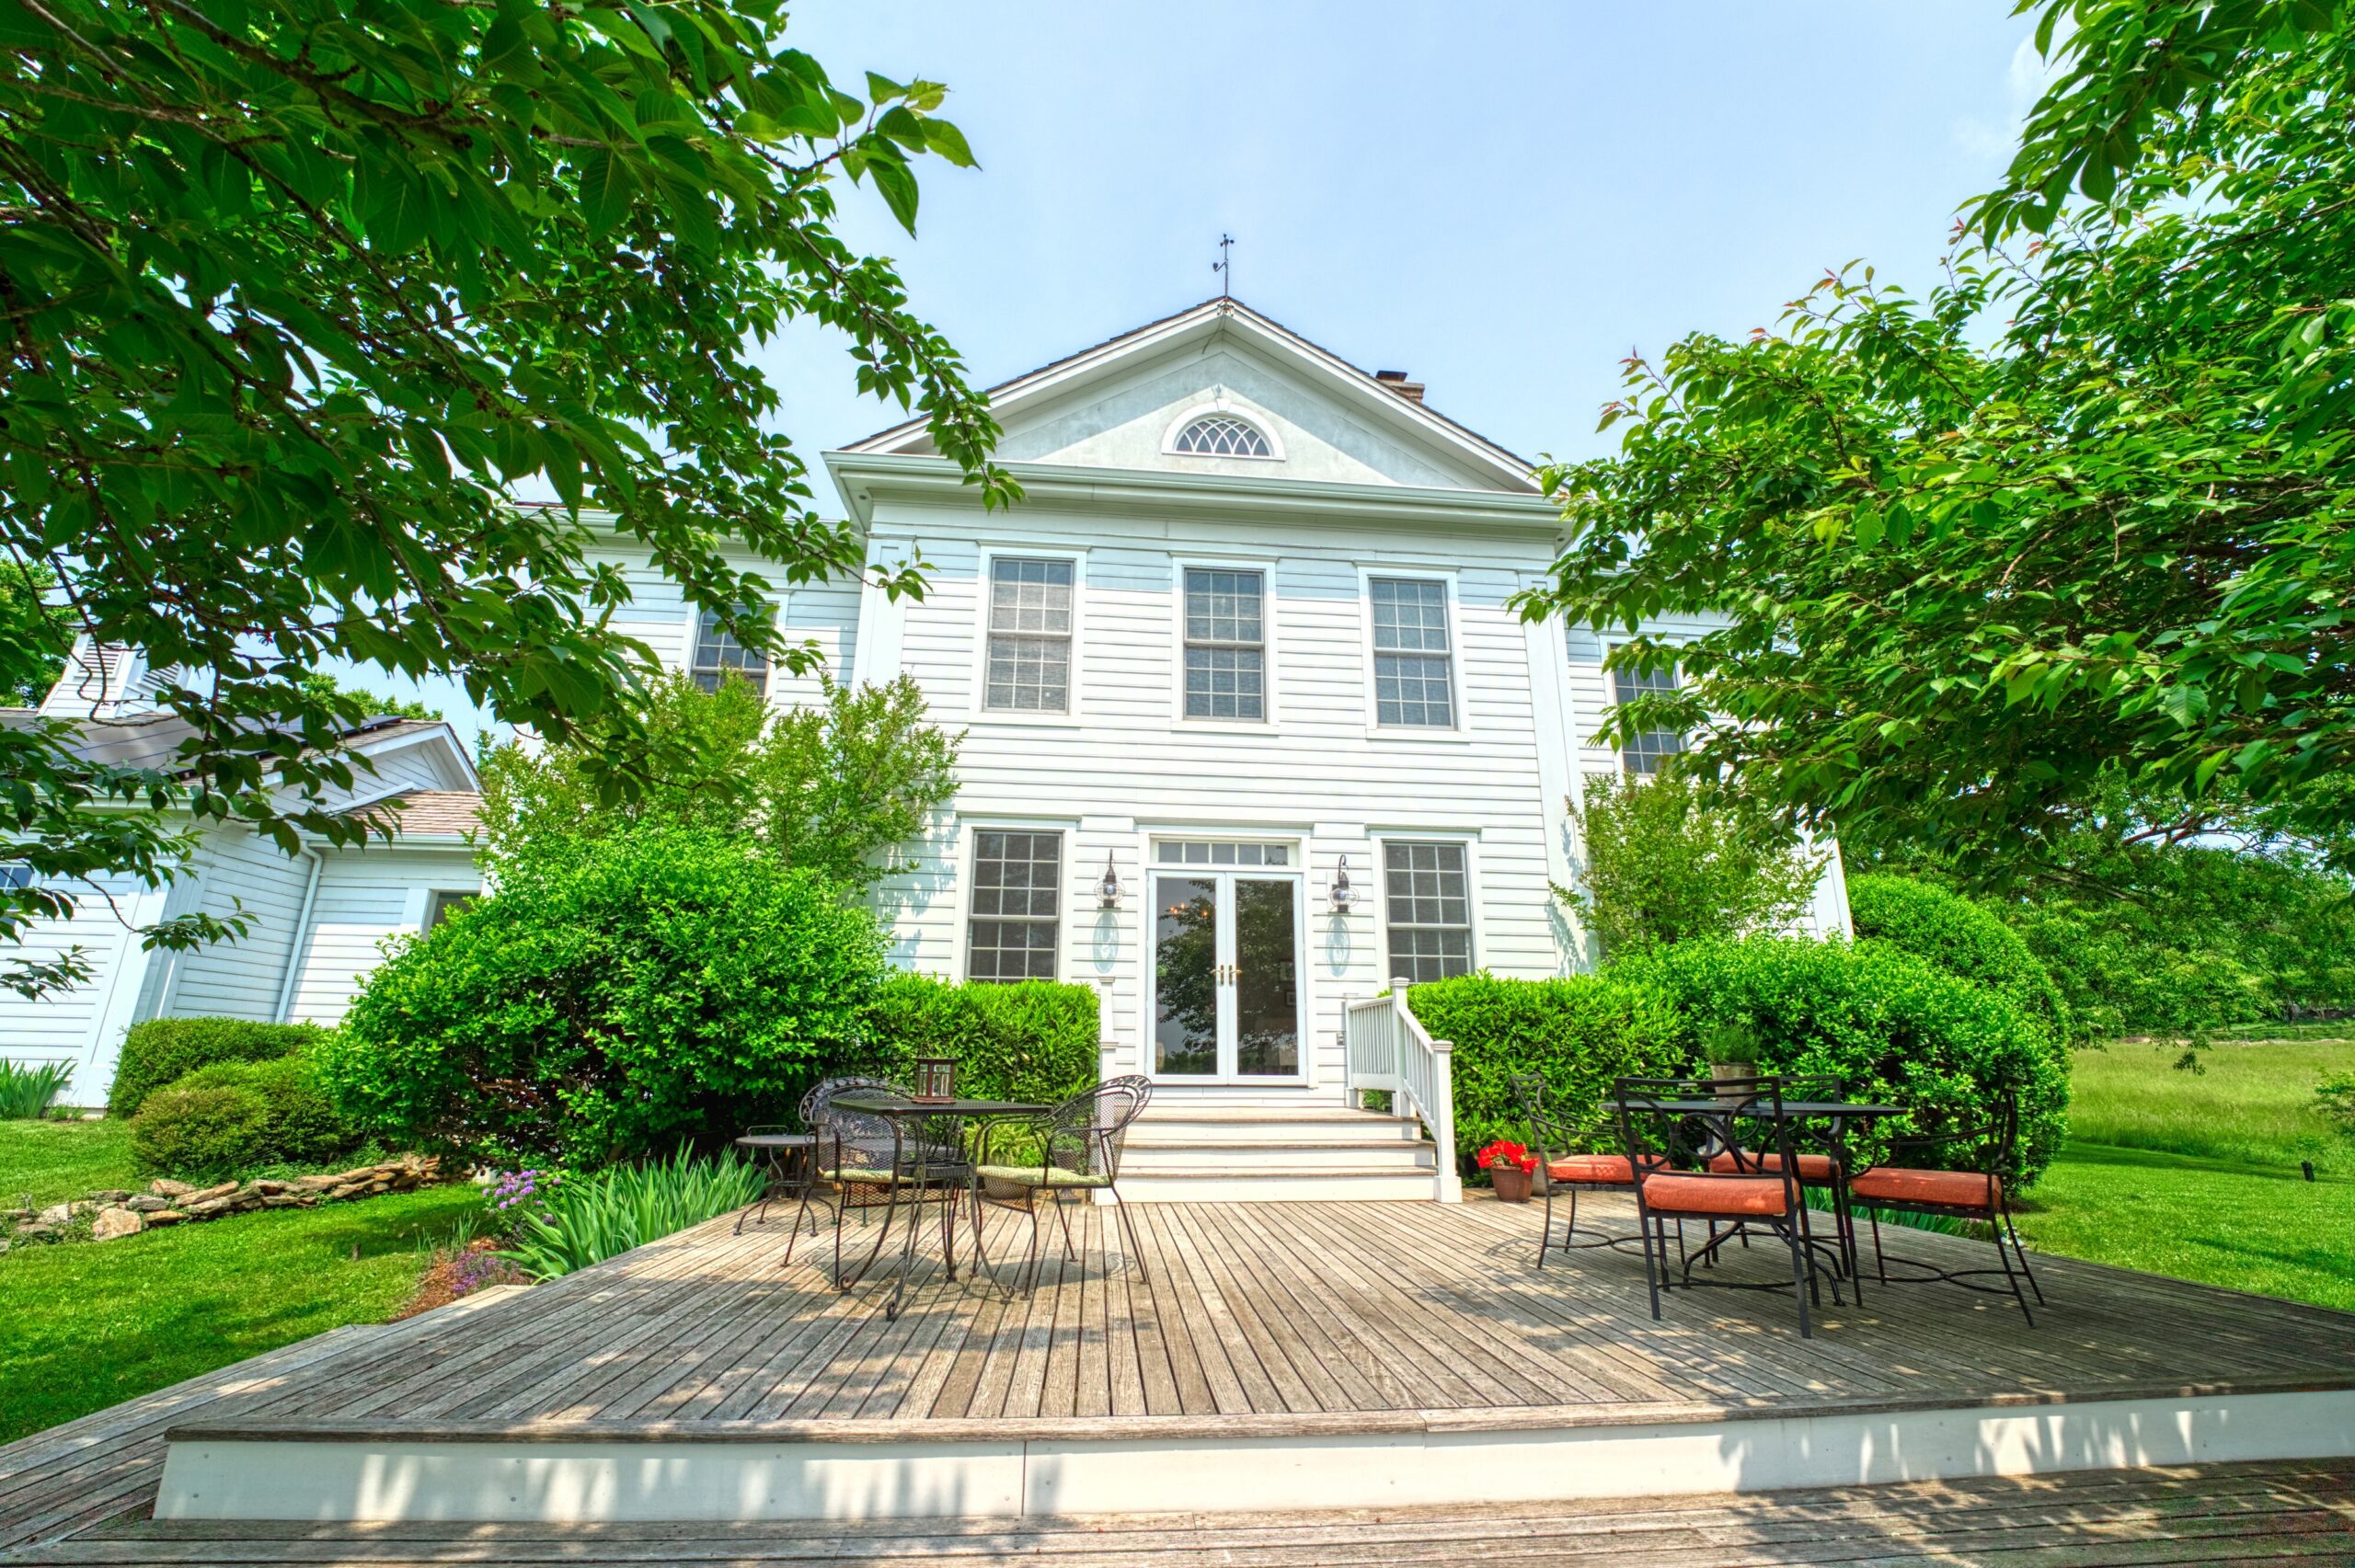 Professional exterior photo of 15203 Clover Hill Road - showing the rear deck from ground level looking back toward the white house